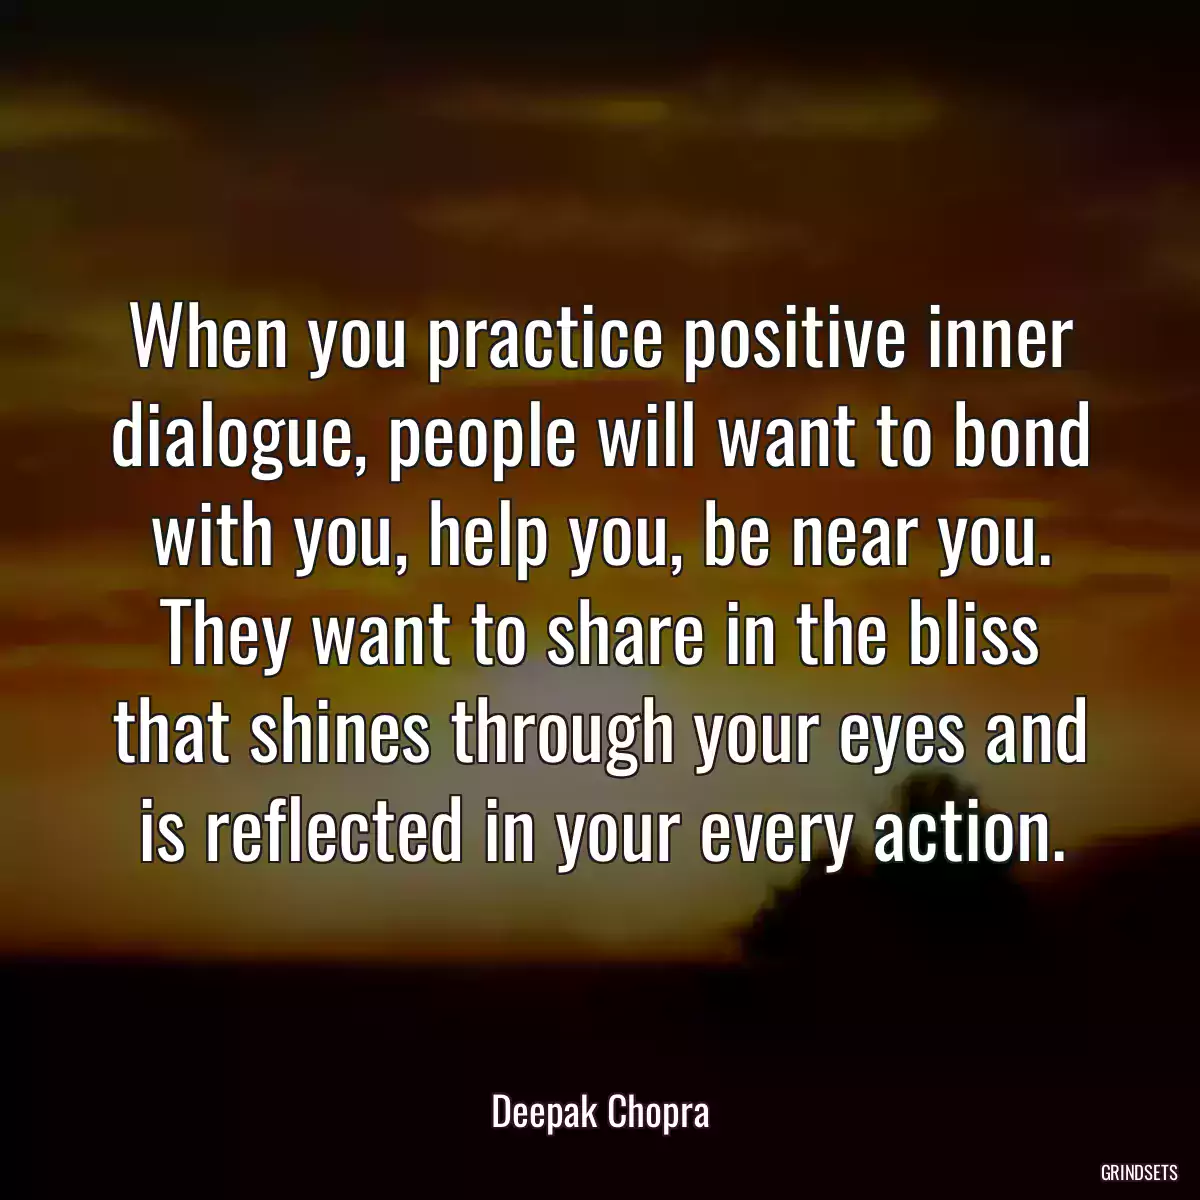 When you practice positive inner dialogue, people will want to bond with you, help you, be near you. They want to share in the bliss that shines through your eyes and is reflected in your every action.